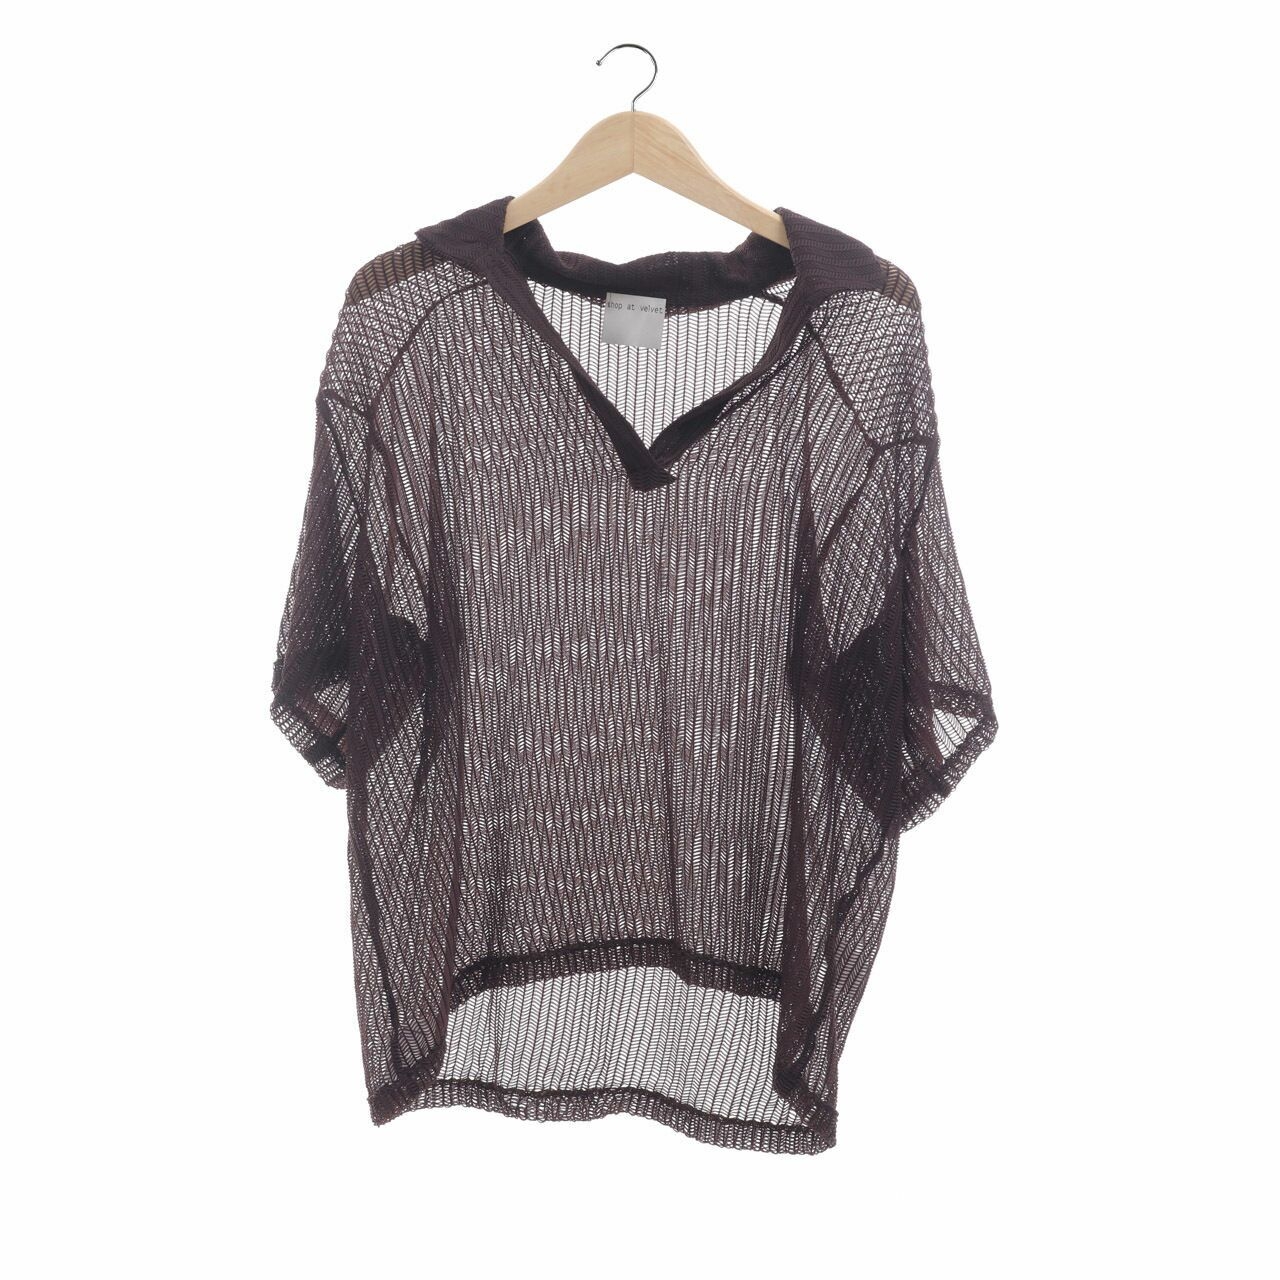 Shop At Velvet Brown Perforated Blouse